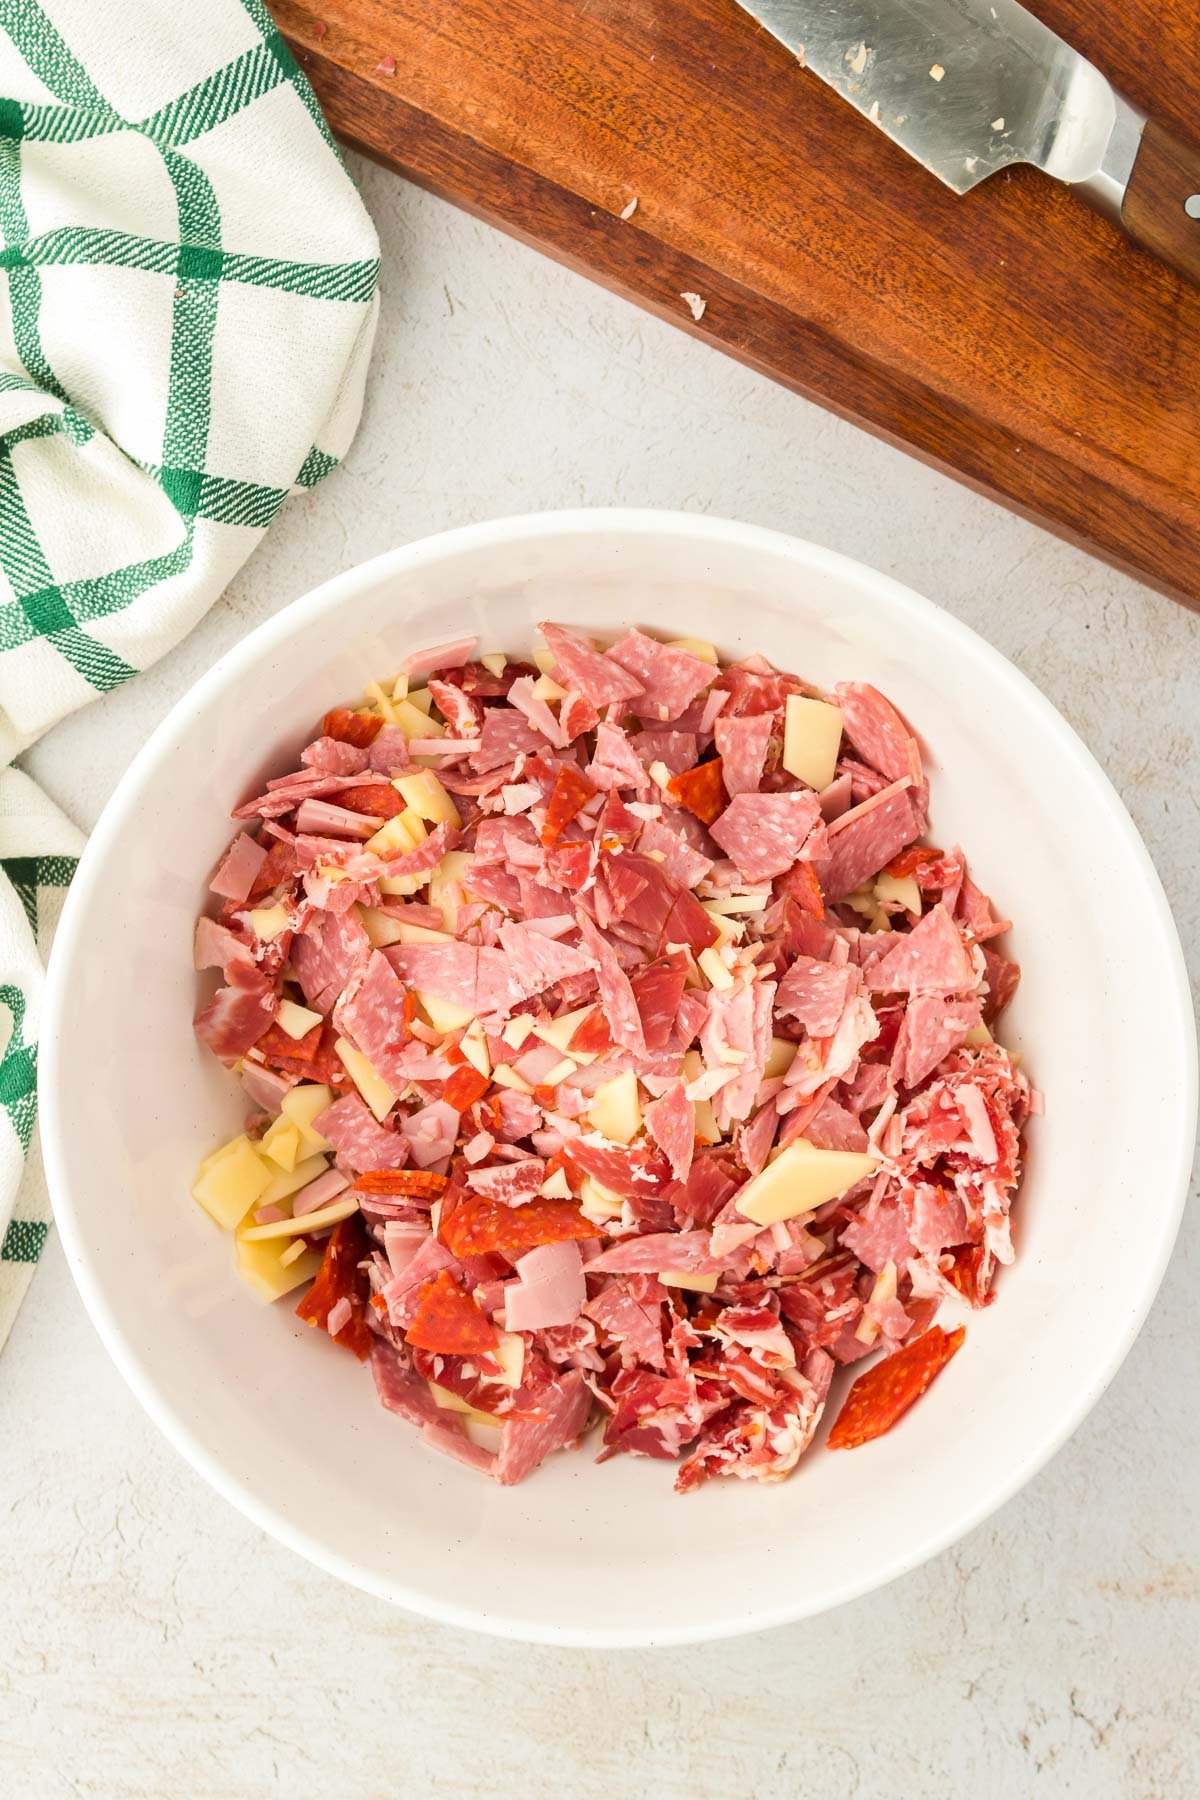 Chopped deli meat and cheese in a large bowl.